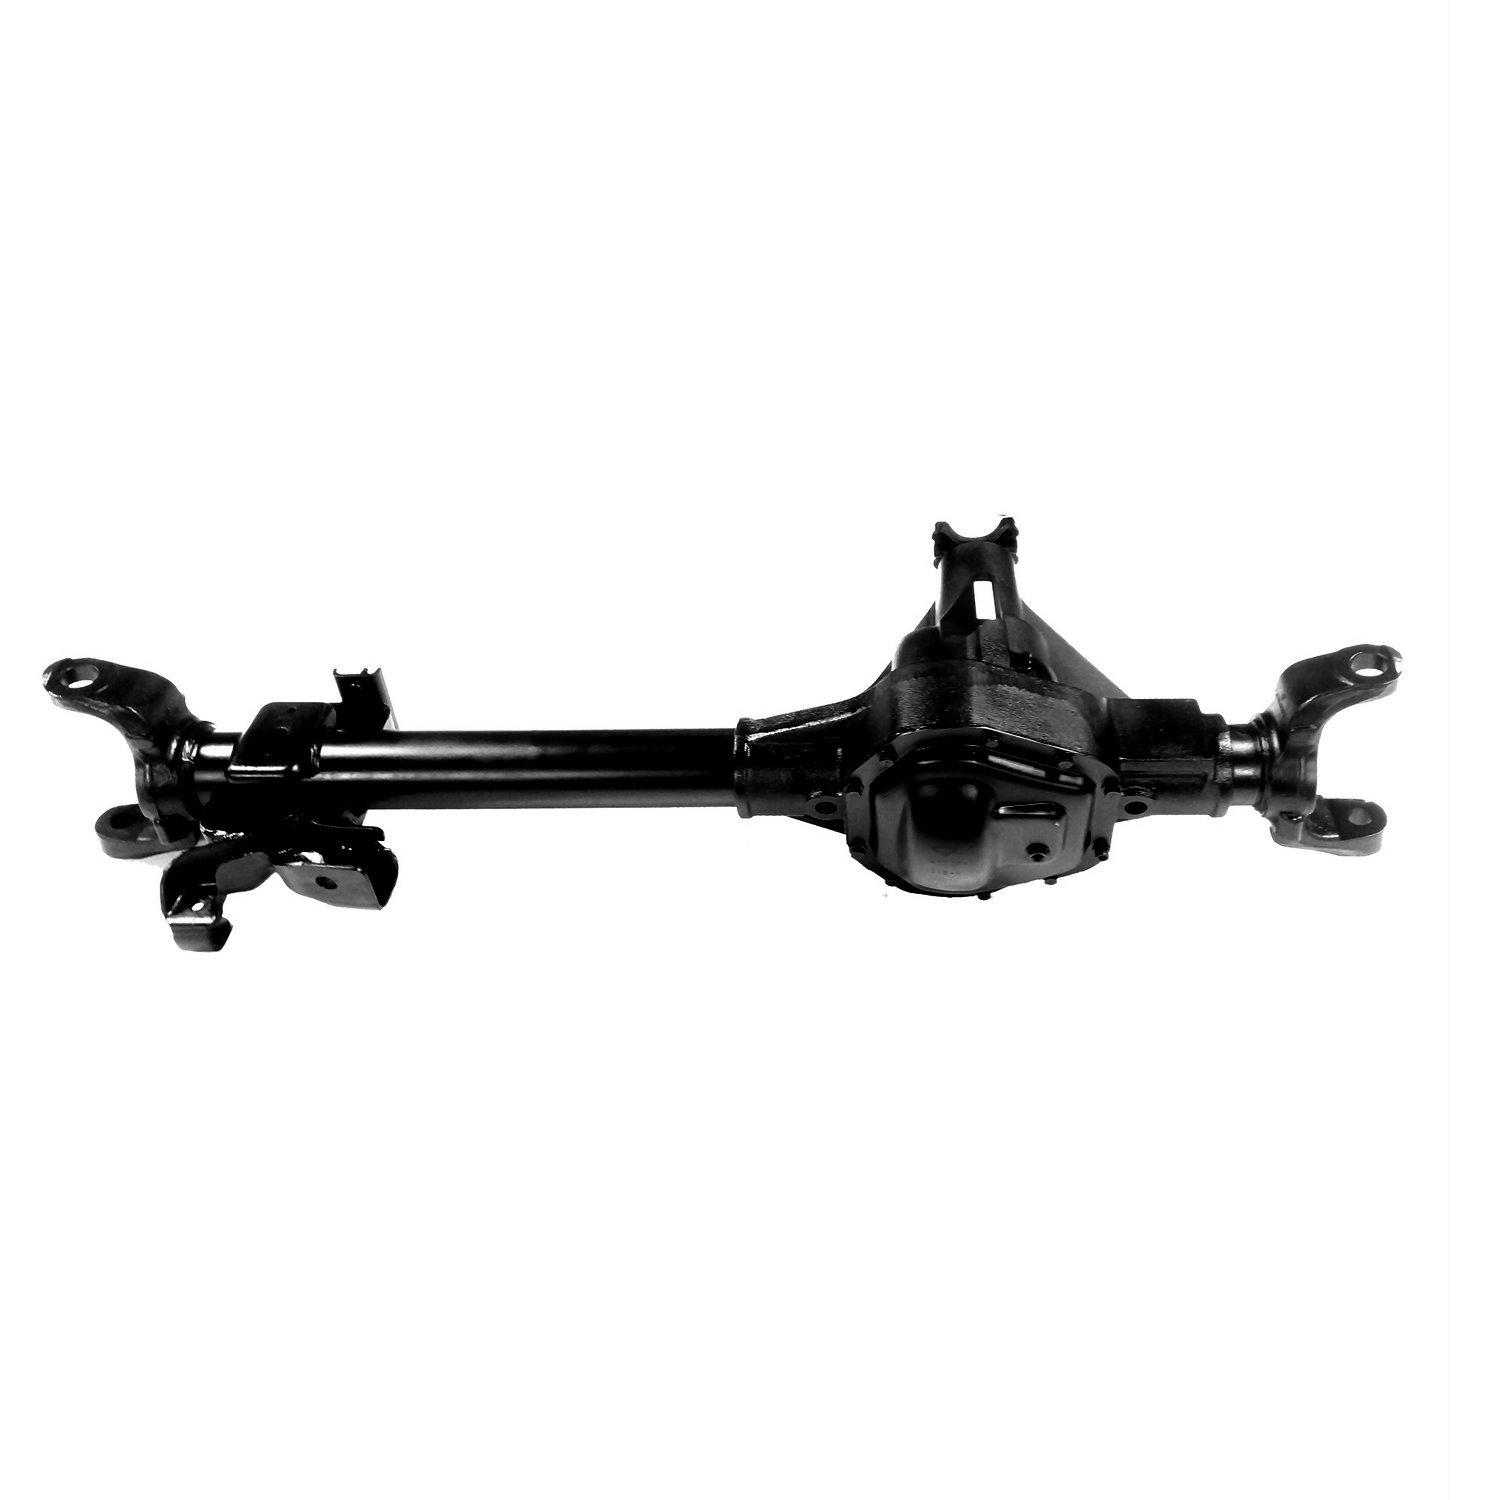 Reman Axle Assembly, For Dana 60, 2005-07 Ford F250 & F350, SRW 4.30 Ratio